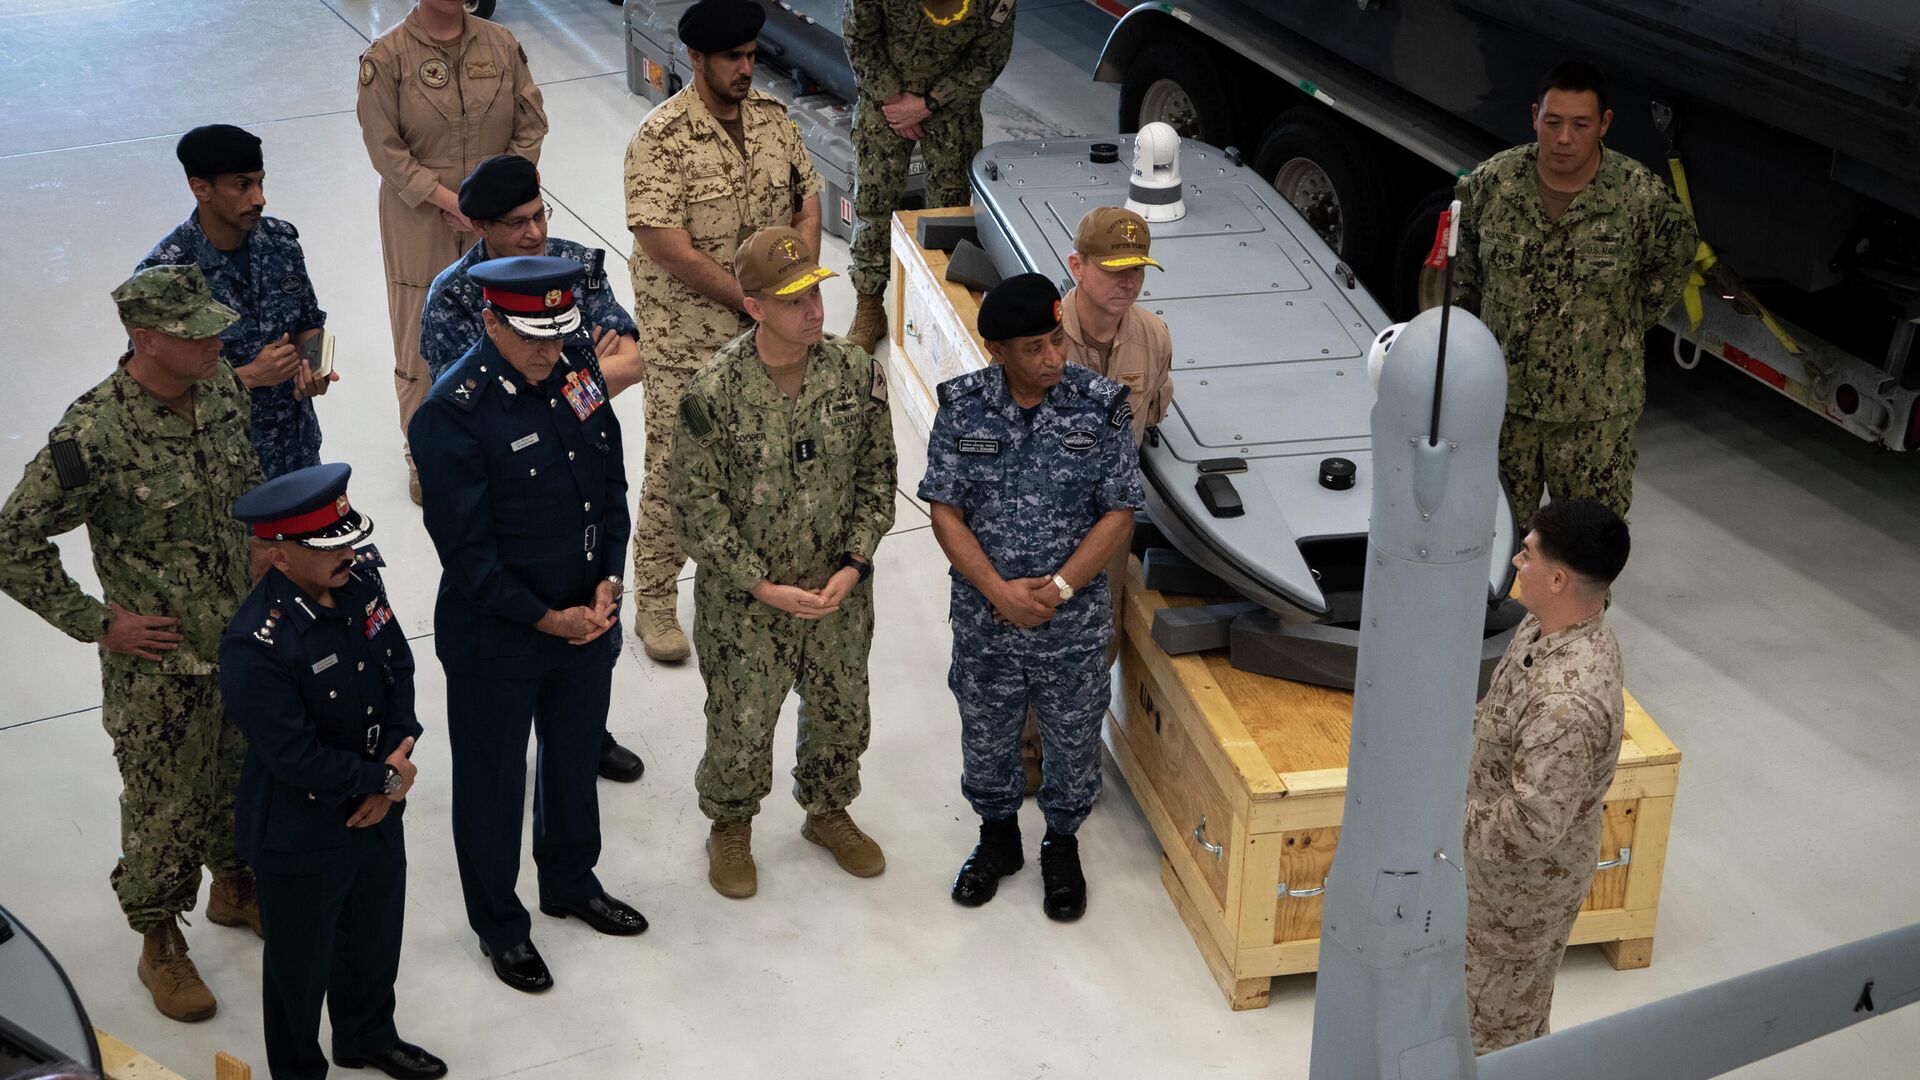 NAVAL SUPPORT ACTIVITY BAHRAIN (Sept. 23, 2021) Vice Adm. Brad Cooper, commander of U.S. Naval Forces Central Command (NAVCENT), U.S. 5th Fleet, and Combined Maritime Forces, center right, along with Major Gen. Ala Abdulla Seyadi, commander of the Bahrain Coast Guard, center left; and Rear Adm - Sputnik International, 1920, 27.09.2021